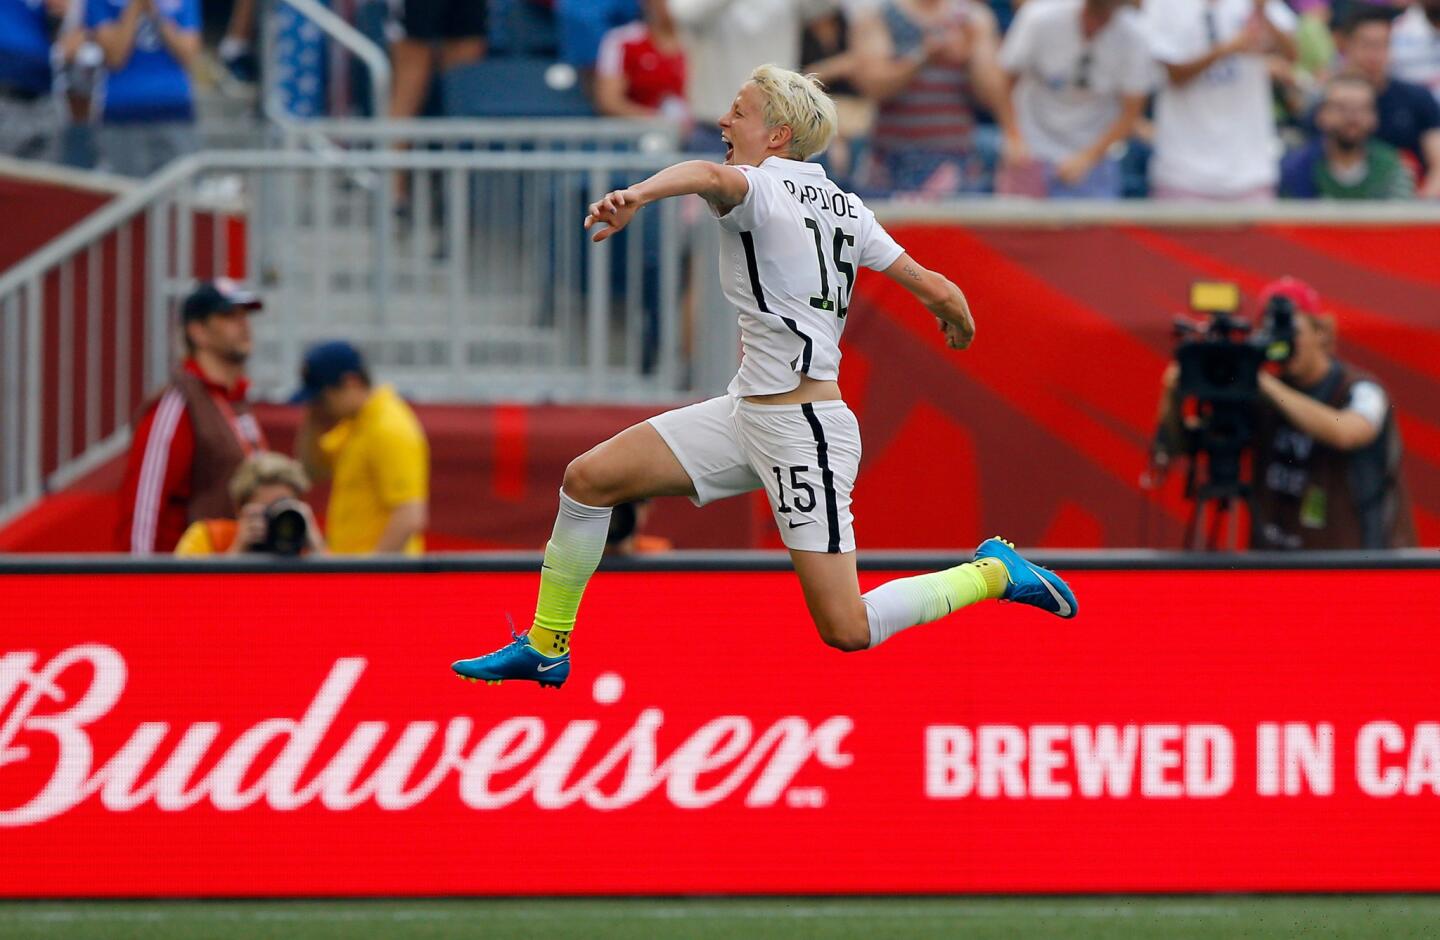 Megan Rapinoe celebrates after scoring a goal against Australia during the 12th minute of the United States' Group D opening match of the World Cup in Winnipeg, Canada.